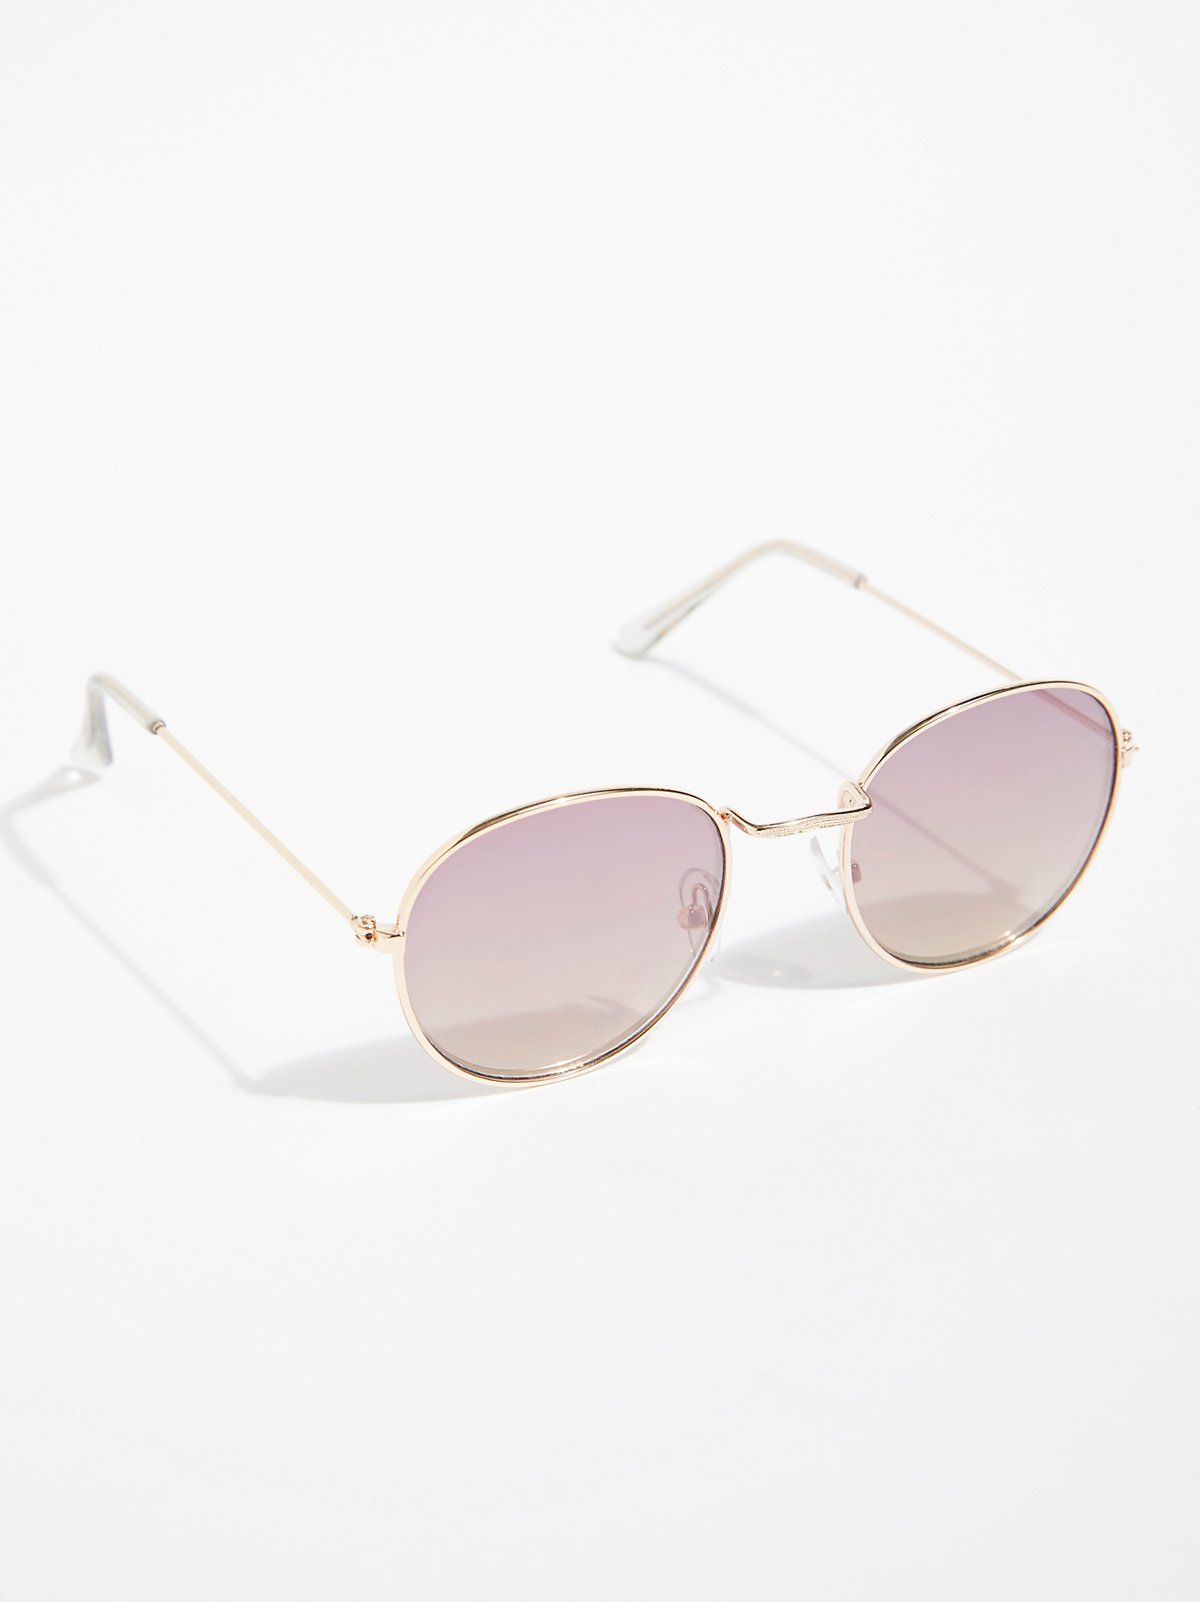 Far Out Round Sunnies | Free People